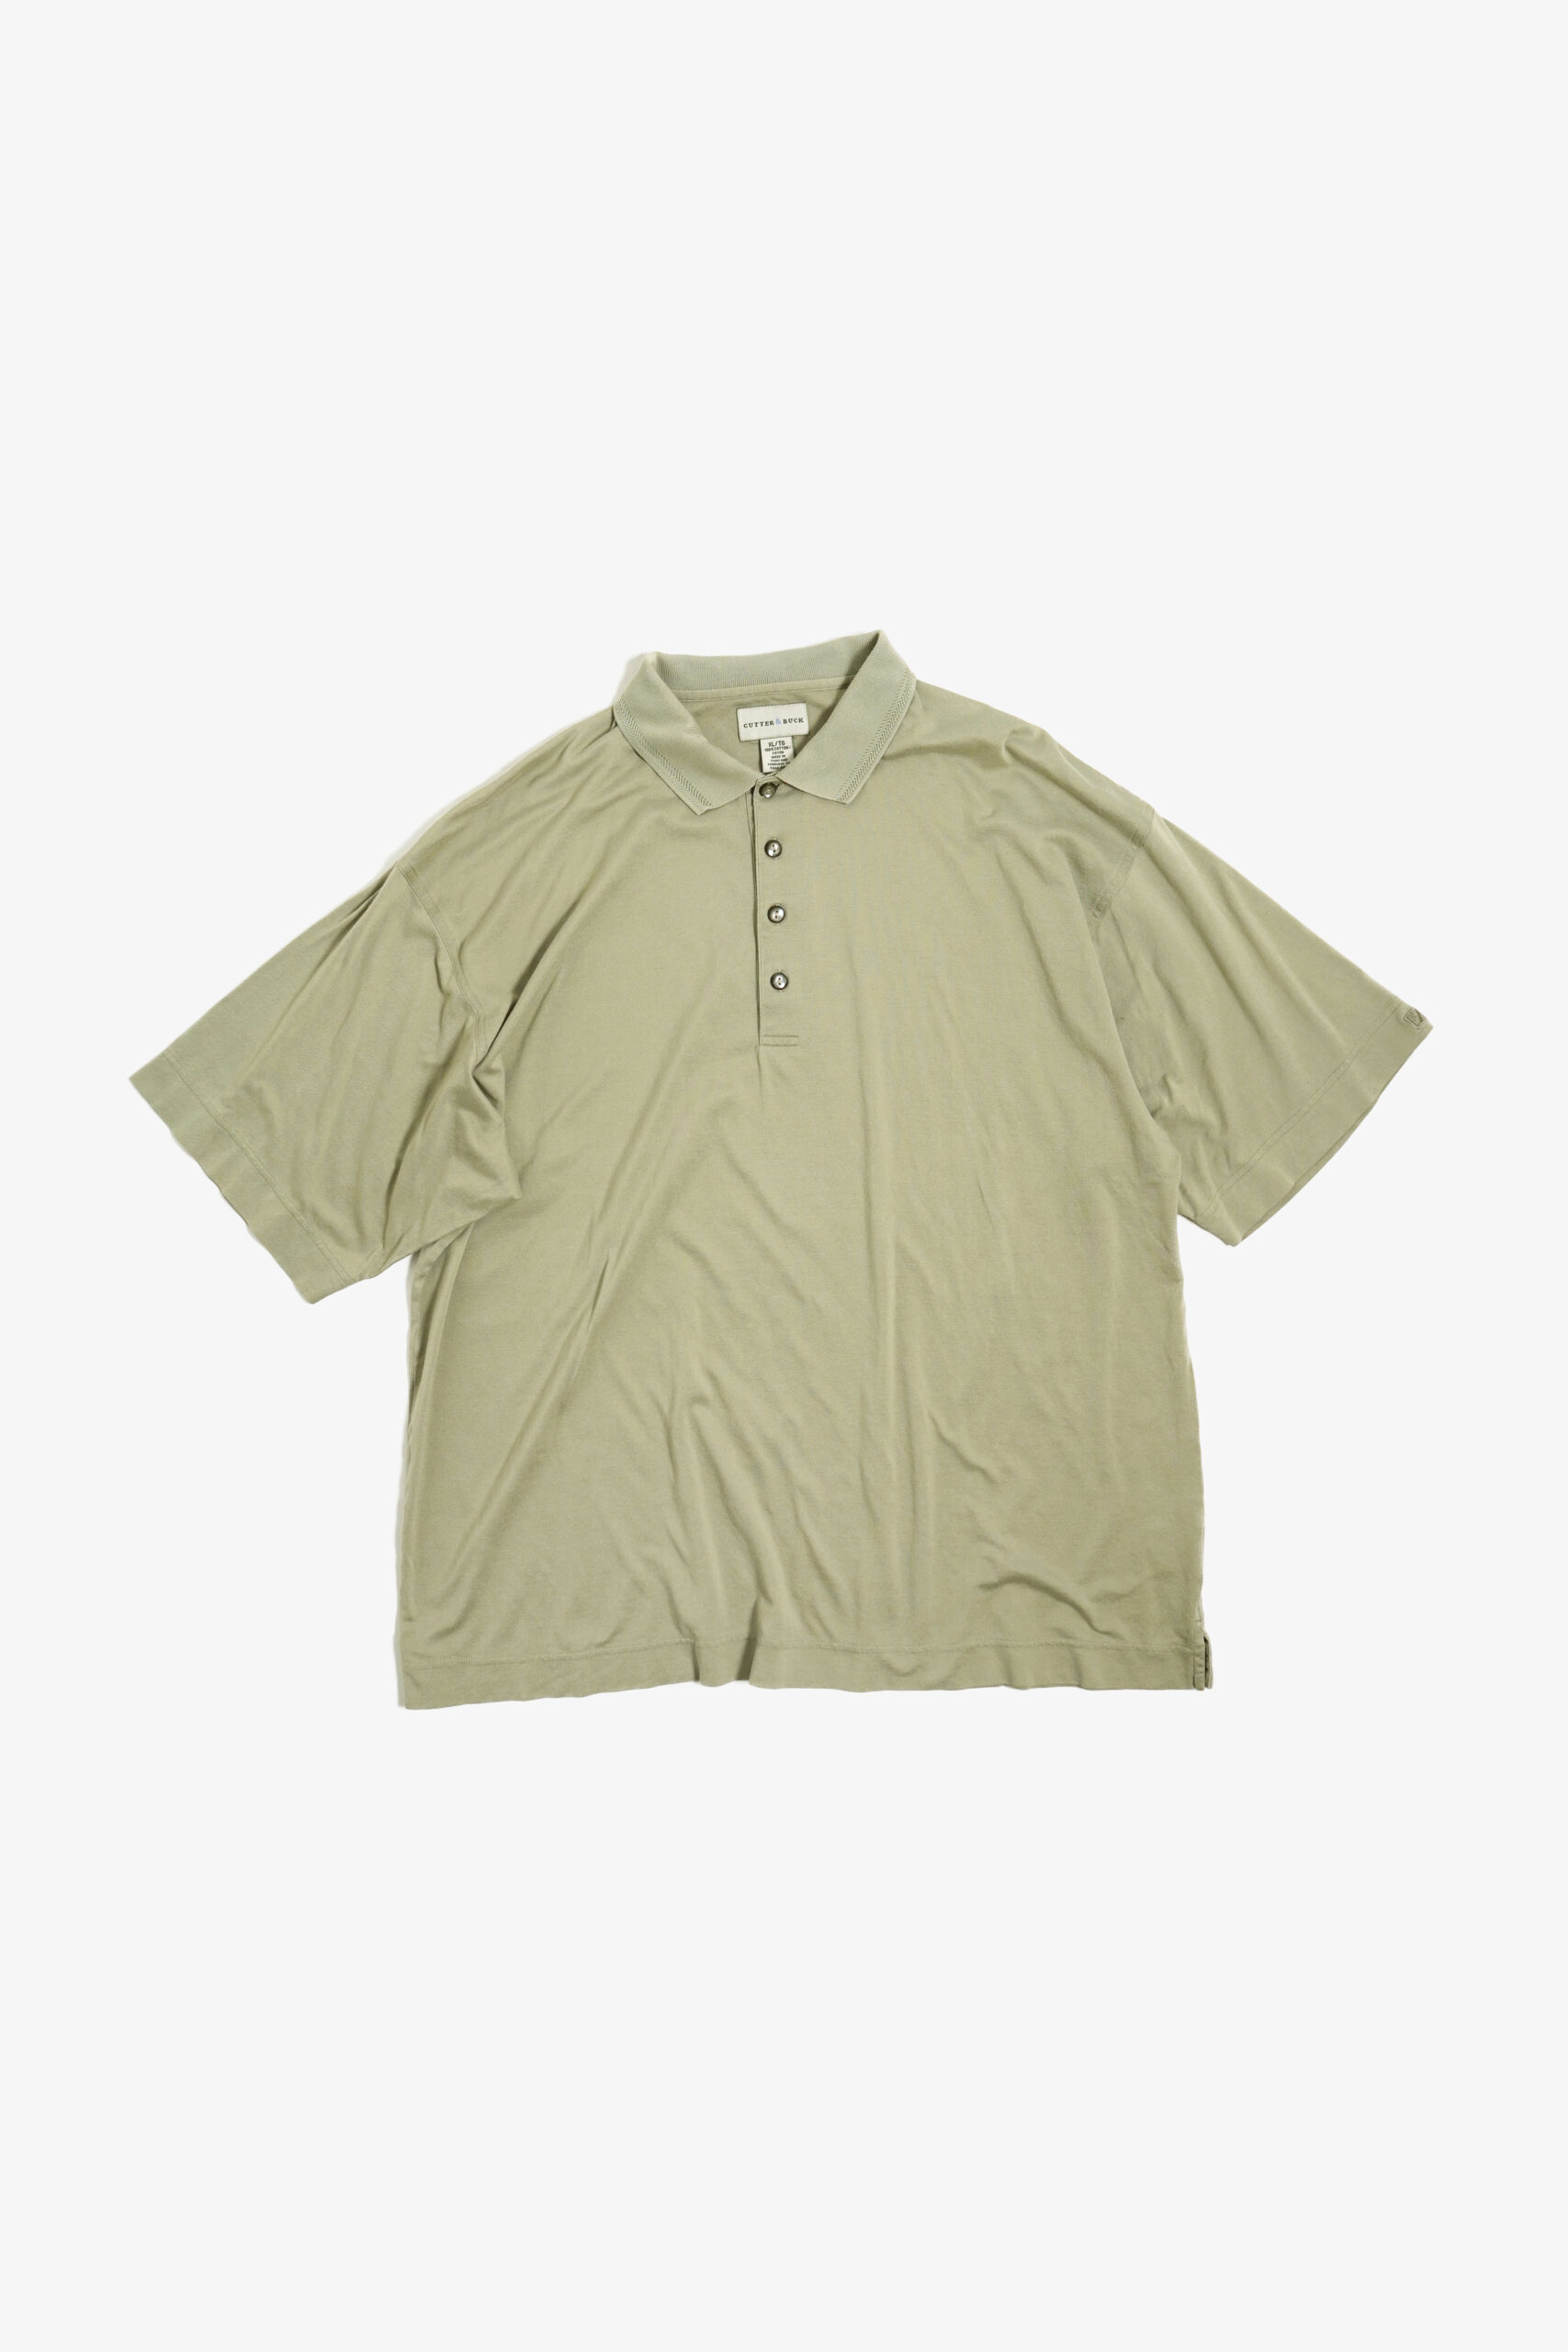 CUTTER BUCK DRY COTTON S/S POLO